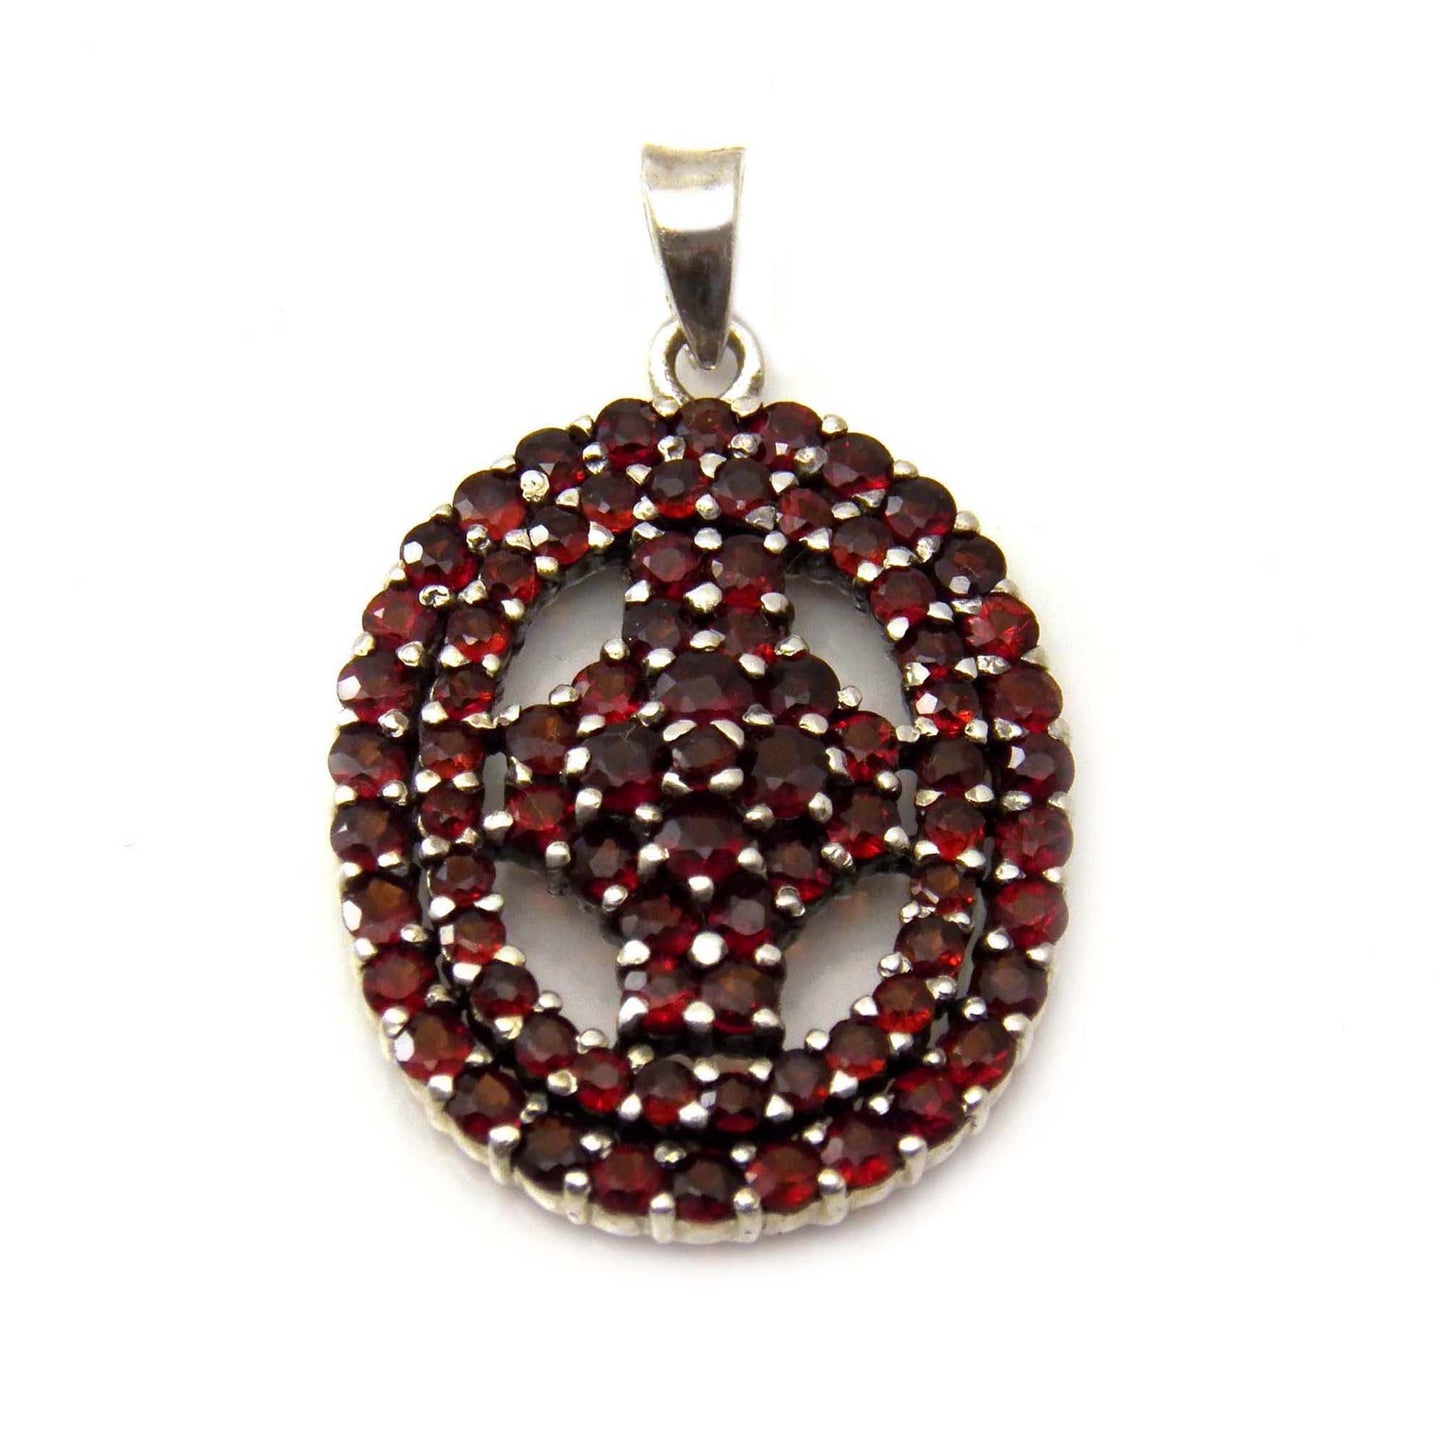 Medieval cross pendant with natural red Bohemian Garnet 